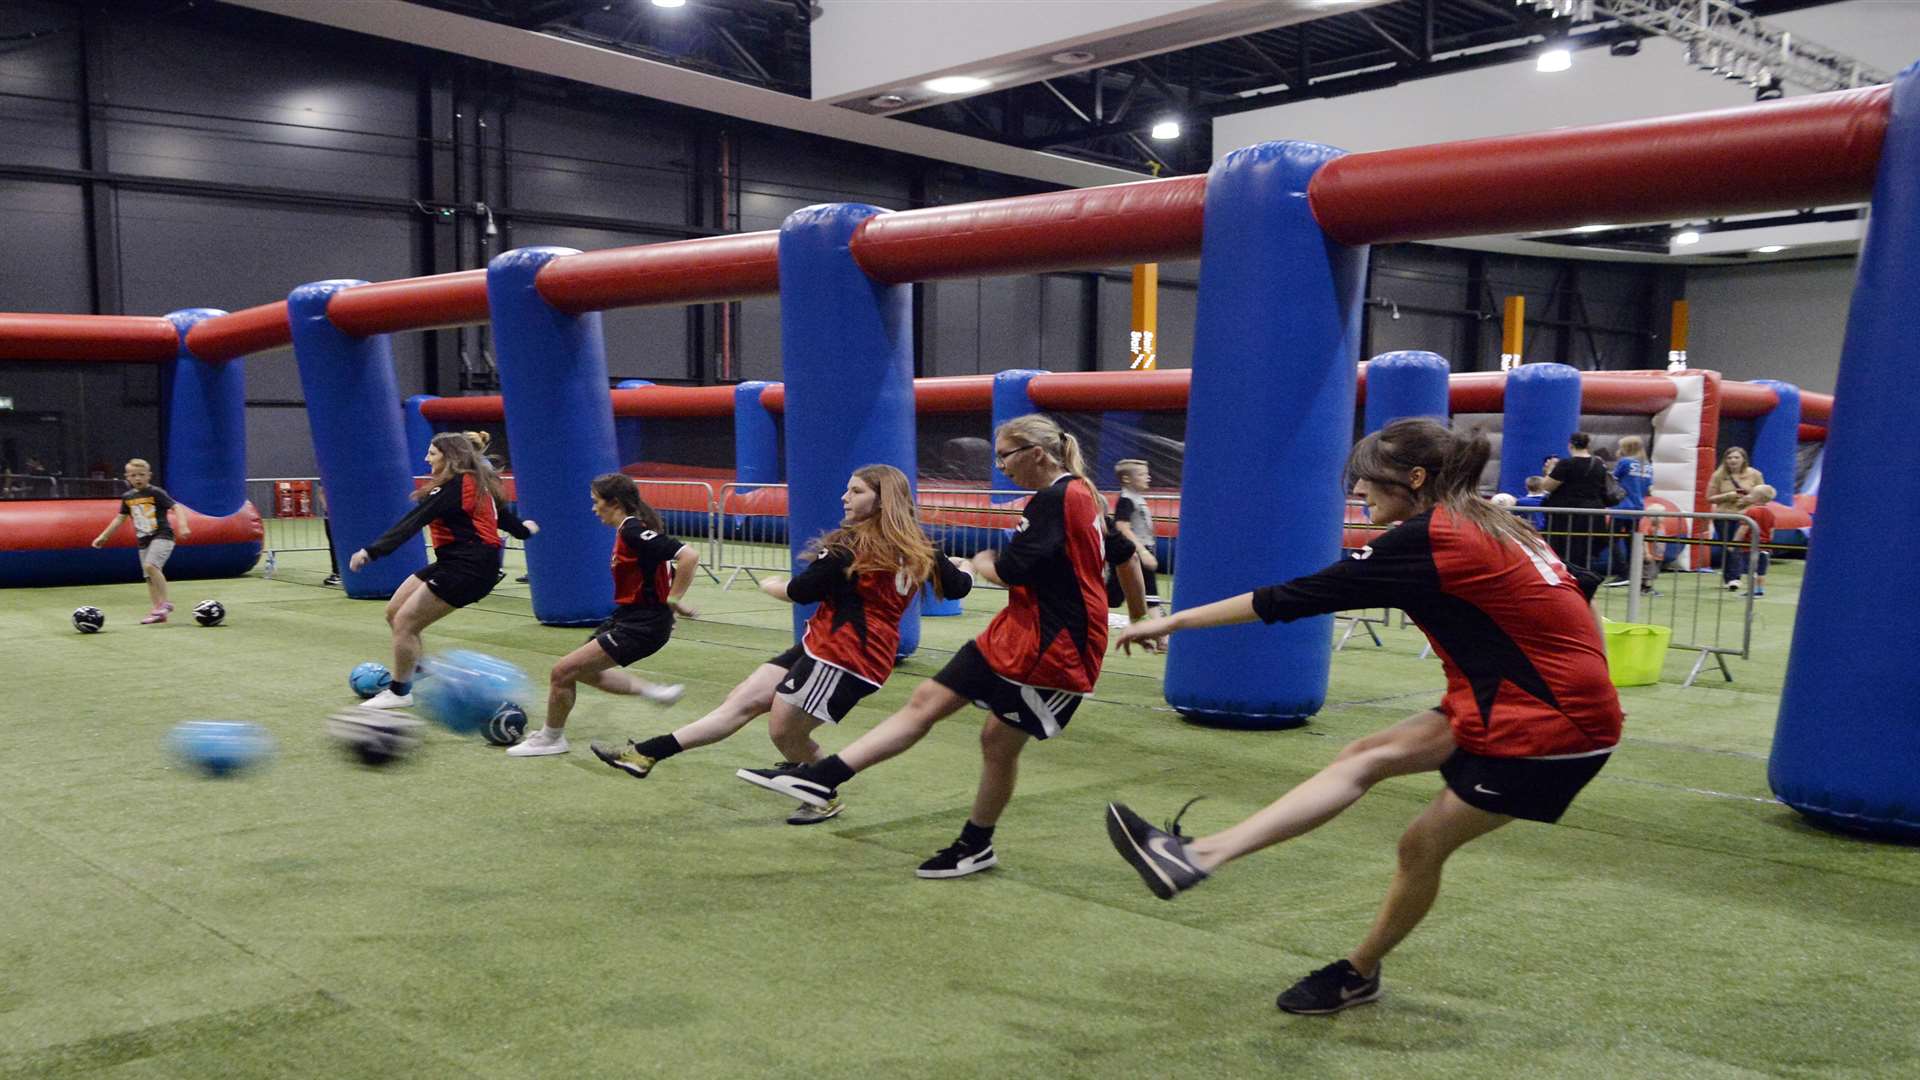 Bluewater's indoor football park